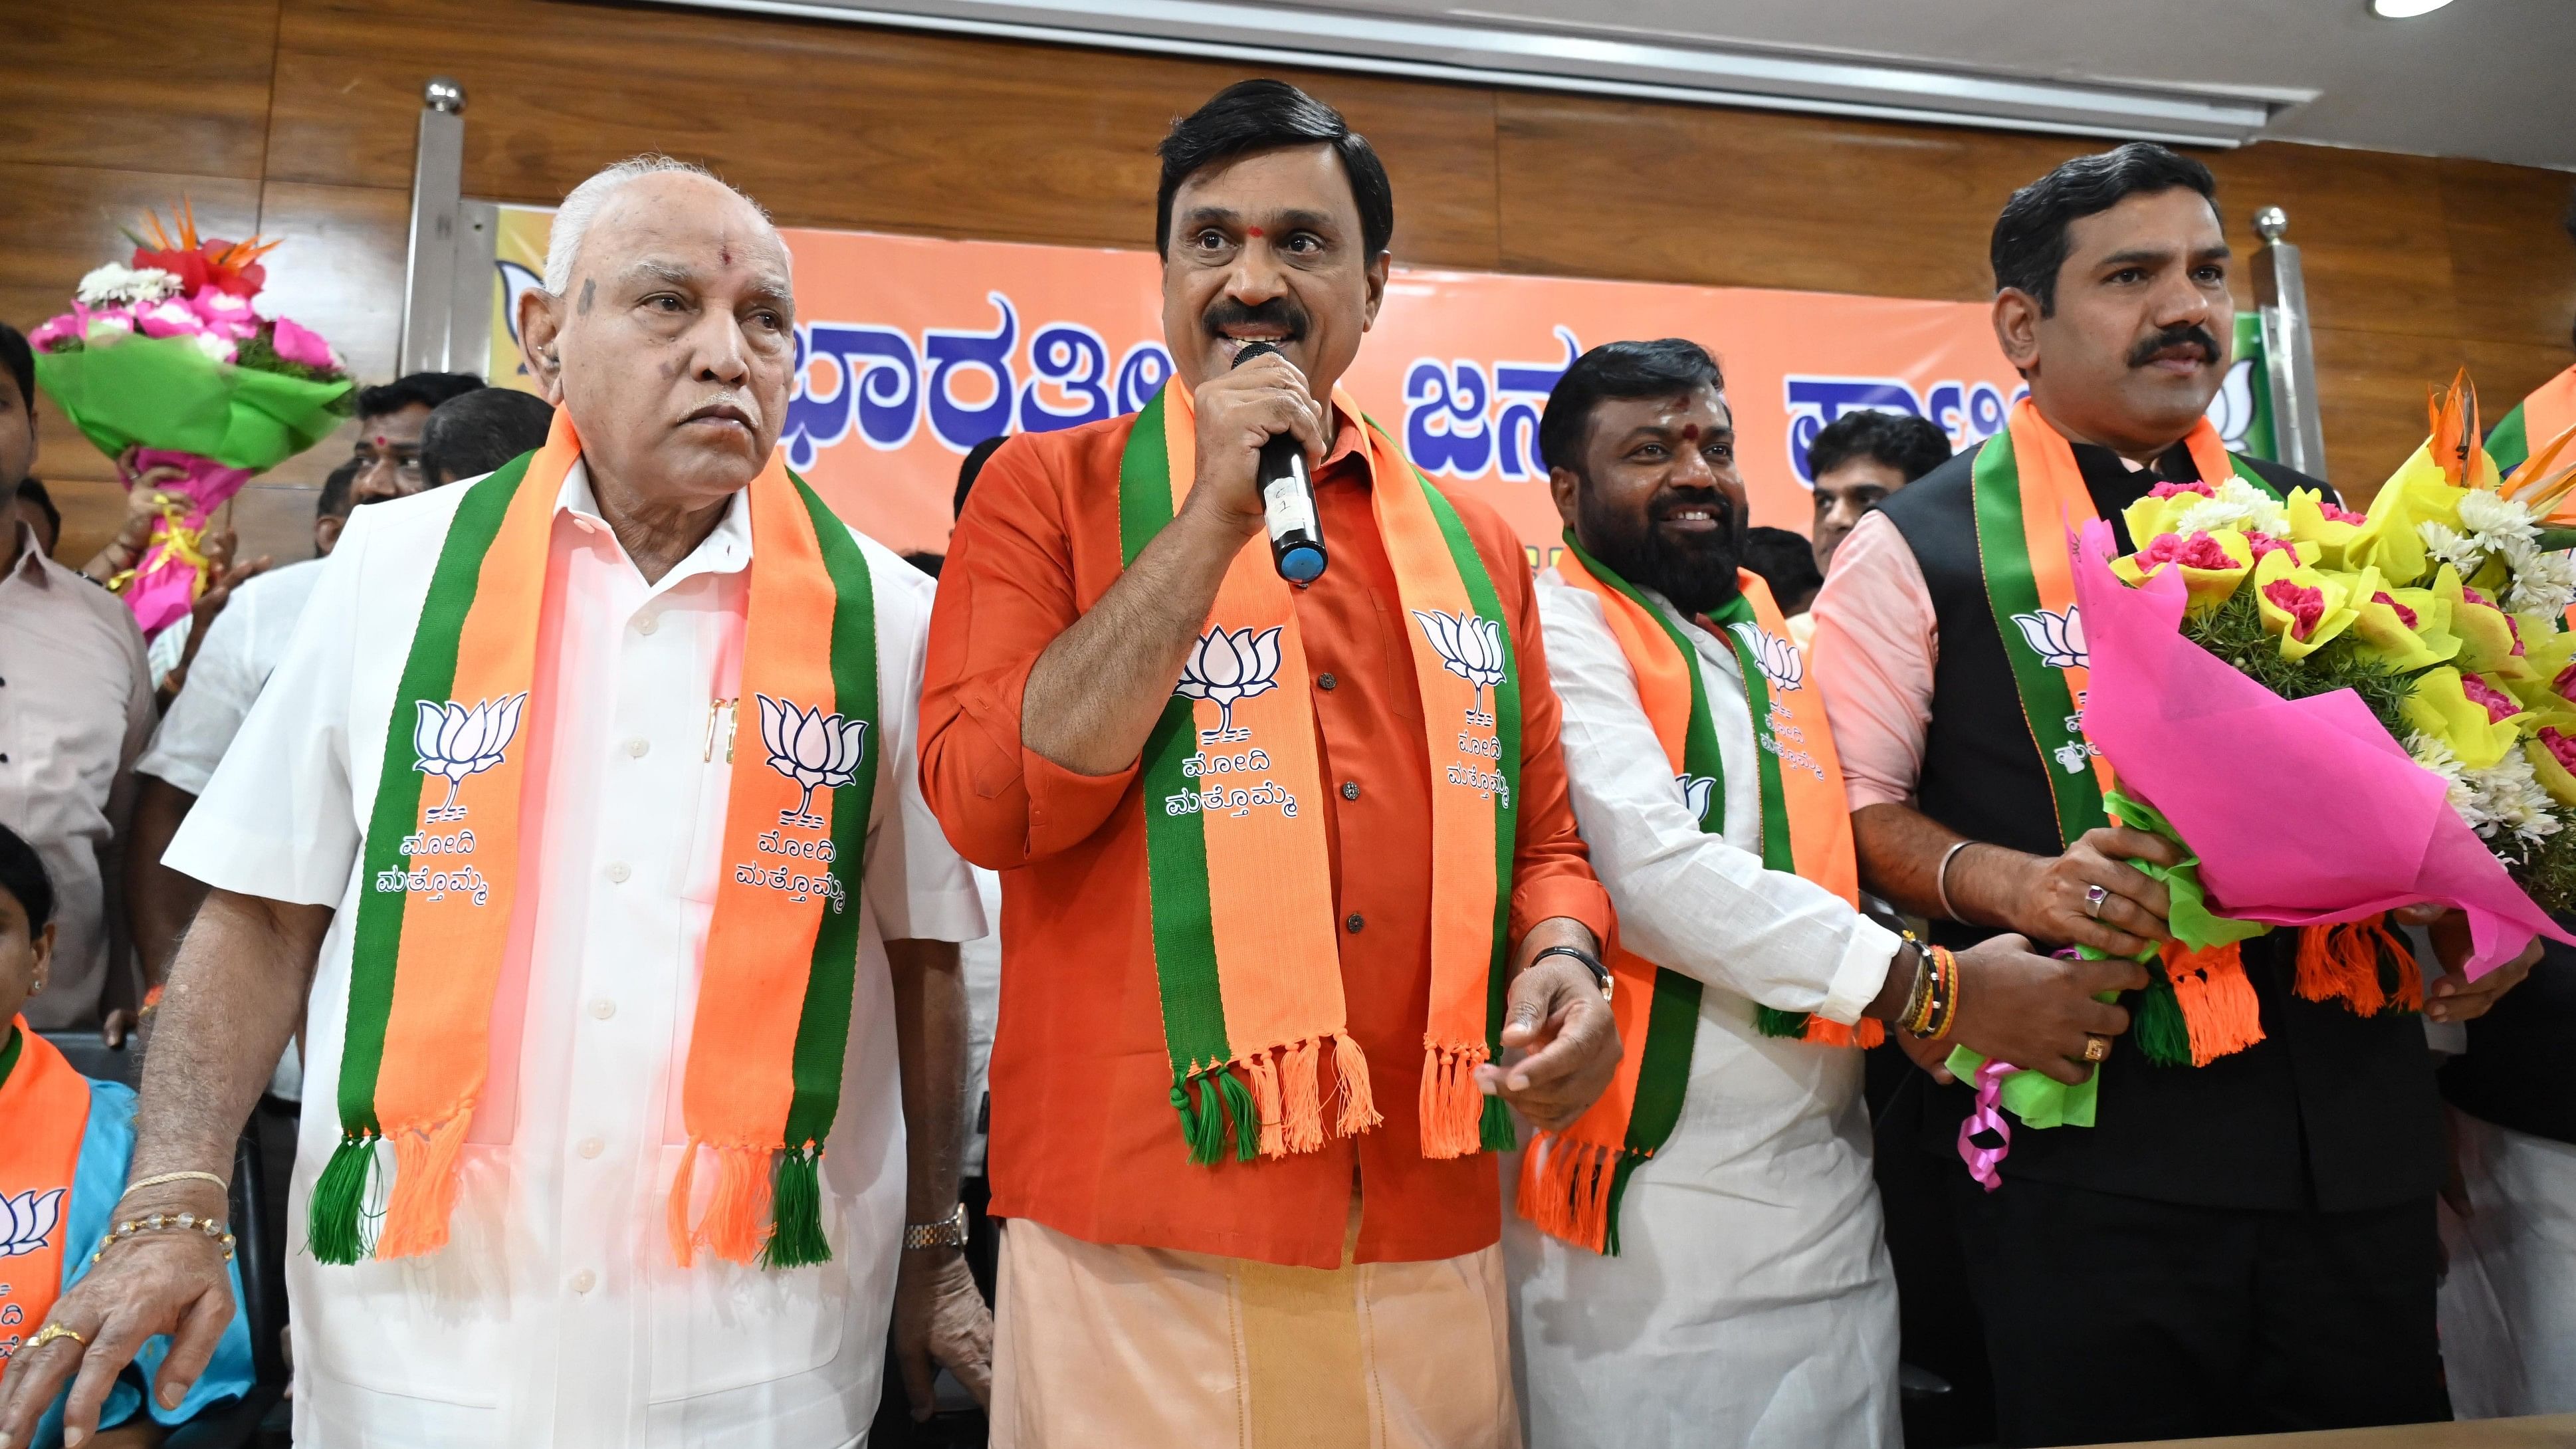 <div class="paragraphs"><p>State BJP president&nbsp;B Y Vijayendra welcomes Gangavati&nbsp;MLA G Janardhana Reddy as he rejoined the party along with his wife Aruna Lakshmi in Bengaluru on Monday. Party veteran B S Yediyurappa and others were present. </p></div>